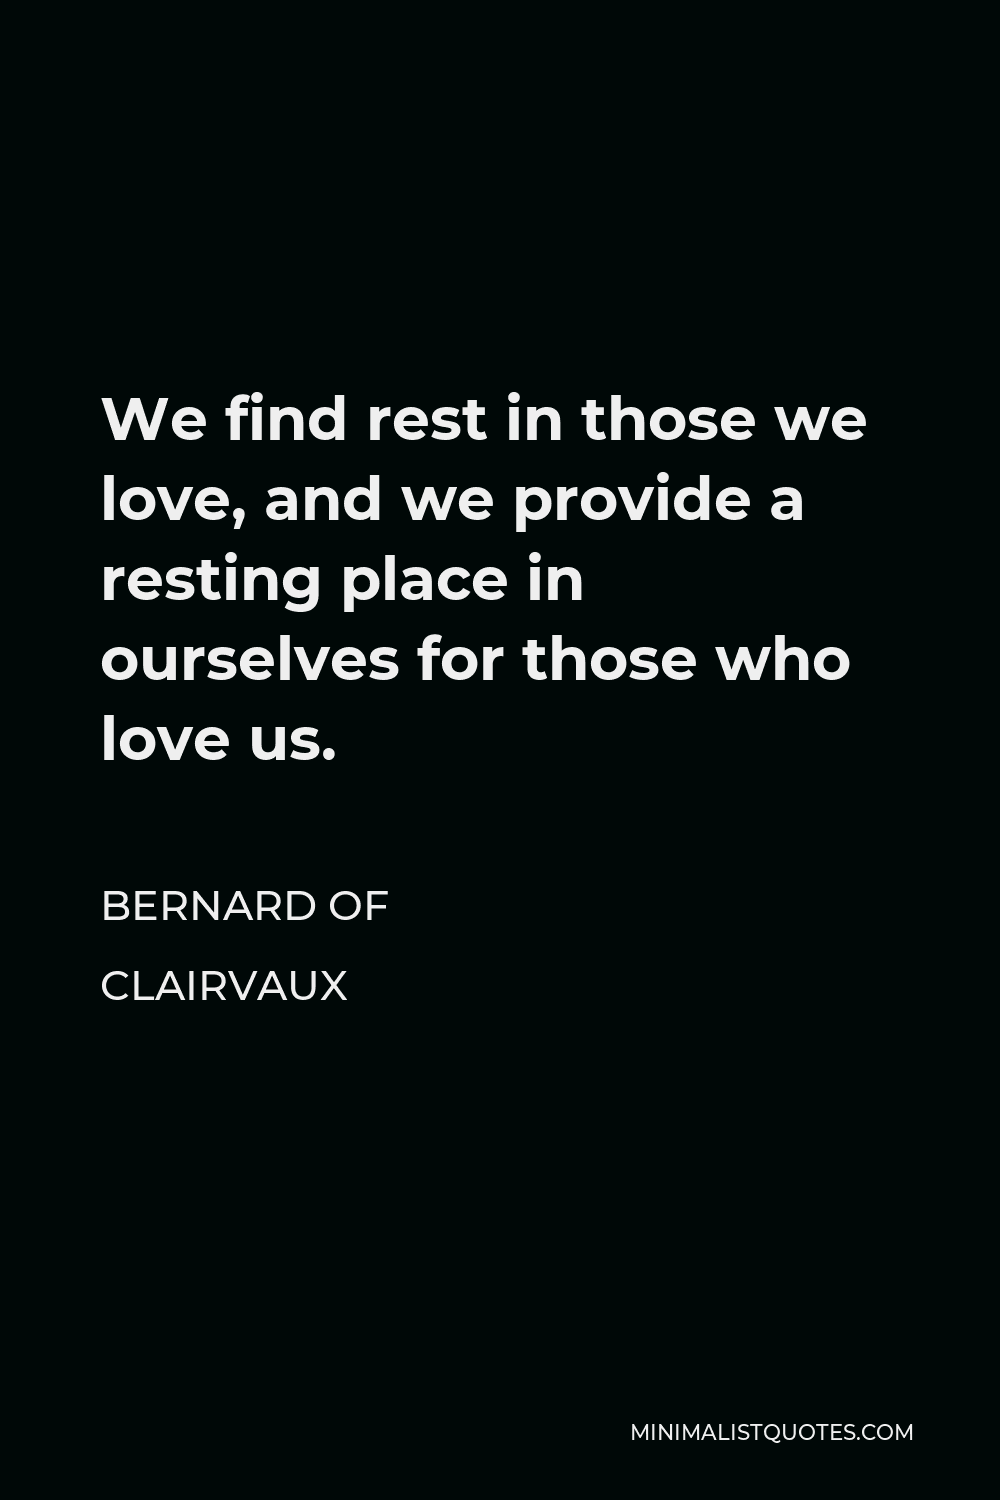 Bernard of Clairvaux Quote - We find rest in those we love, and we provide a resting place in ourselves for those who love us.